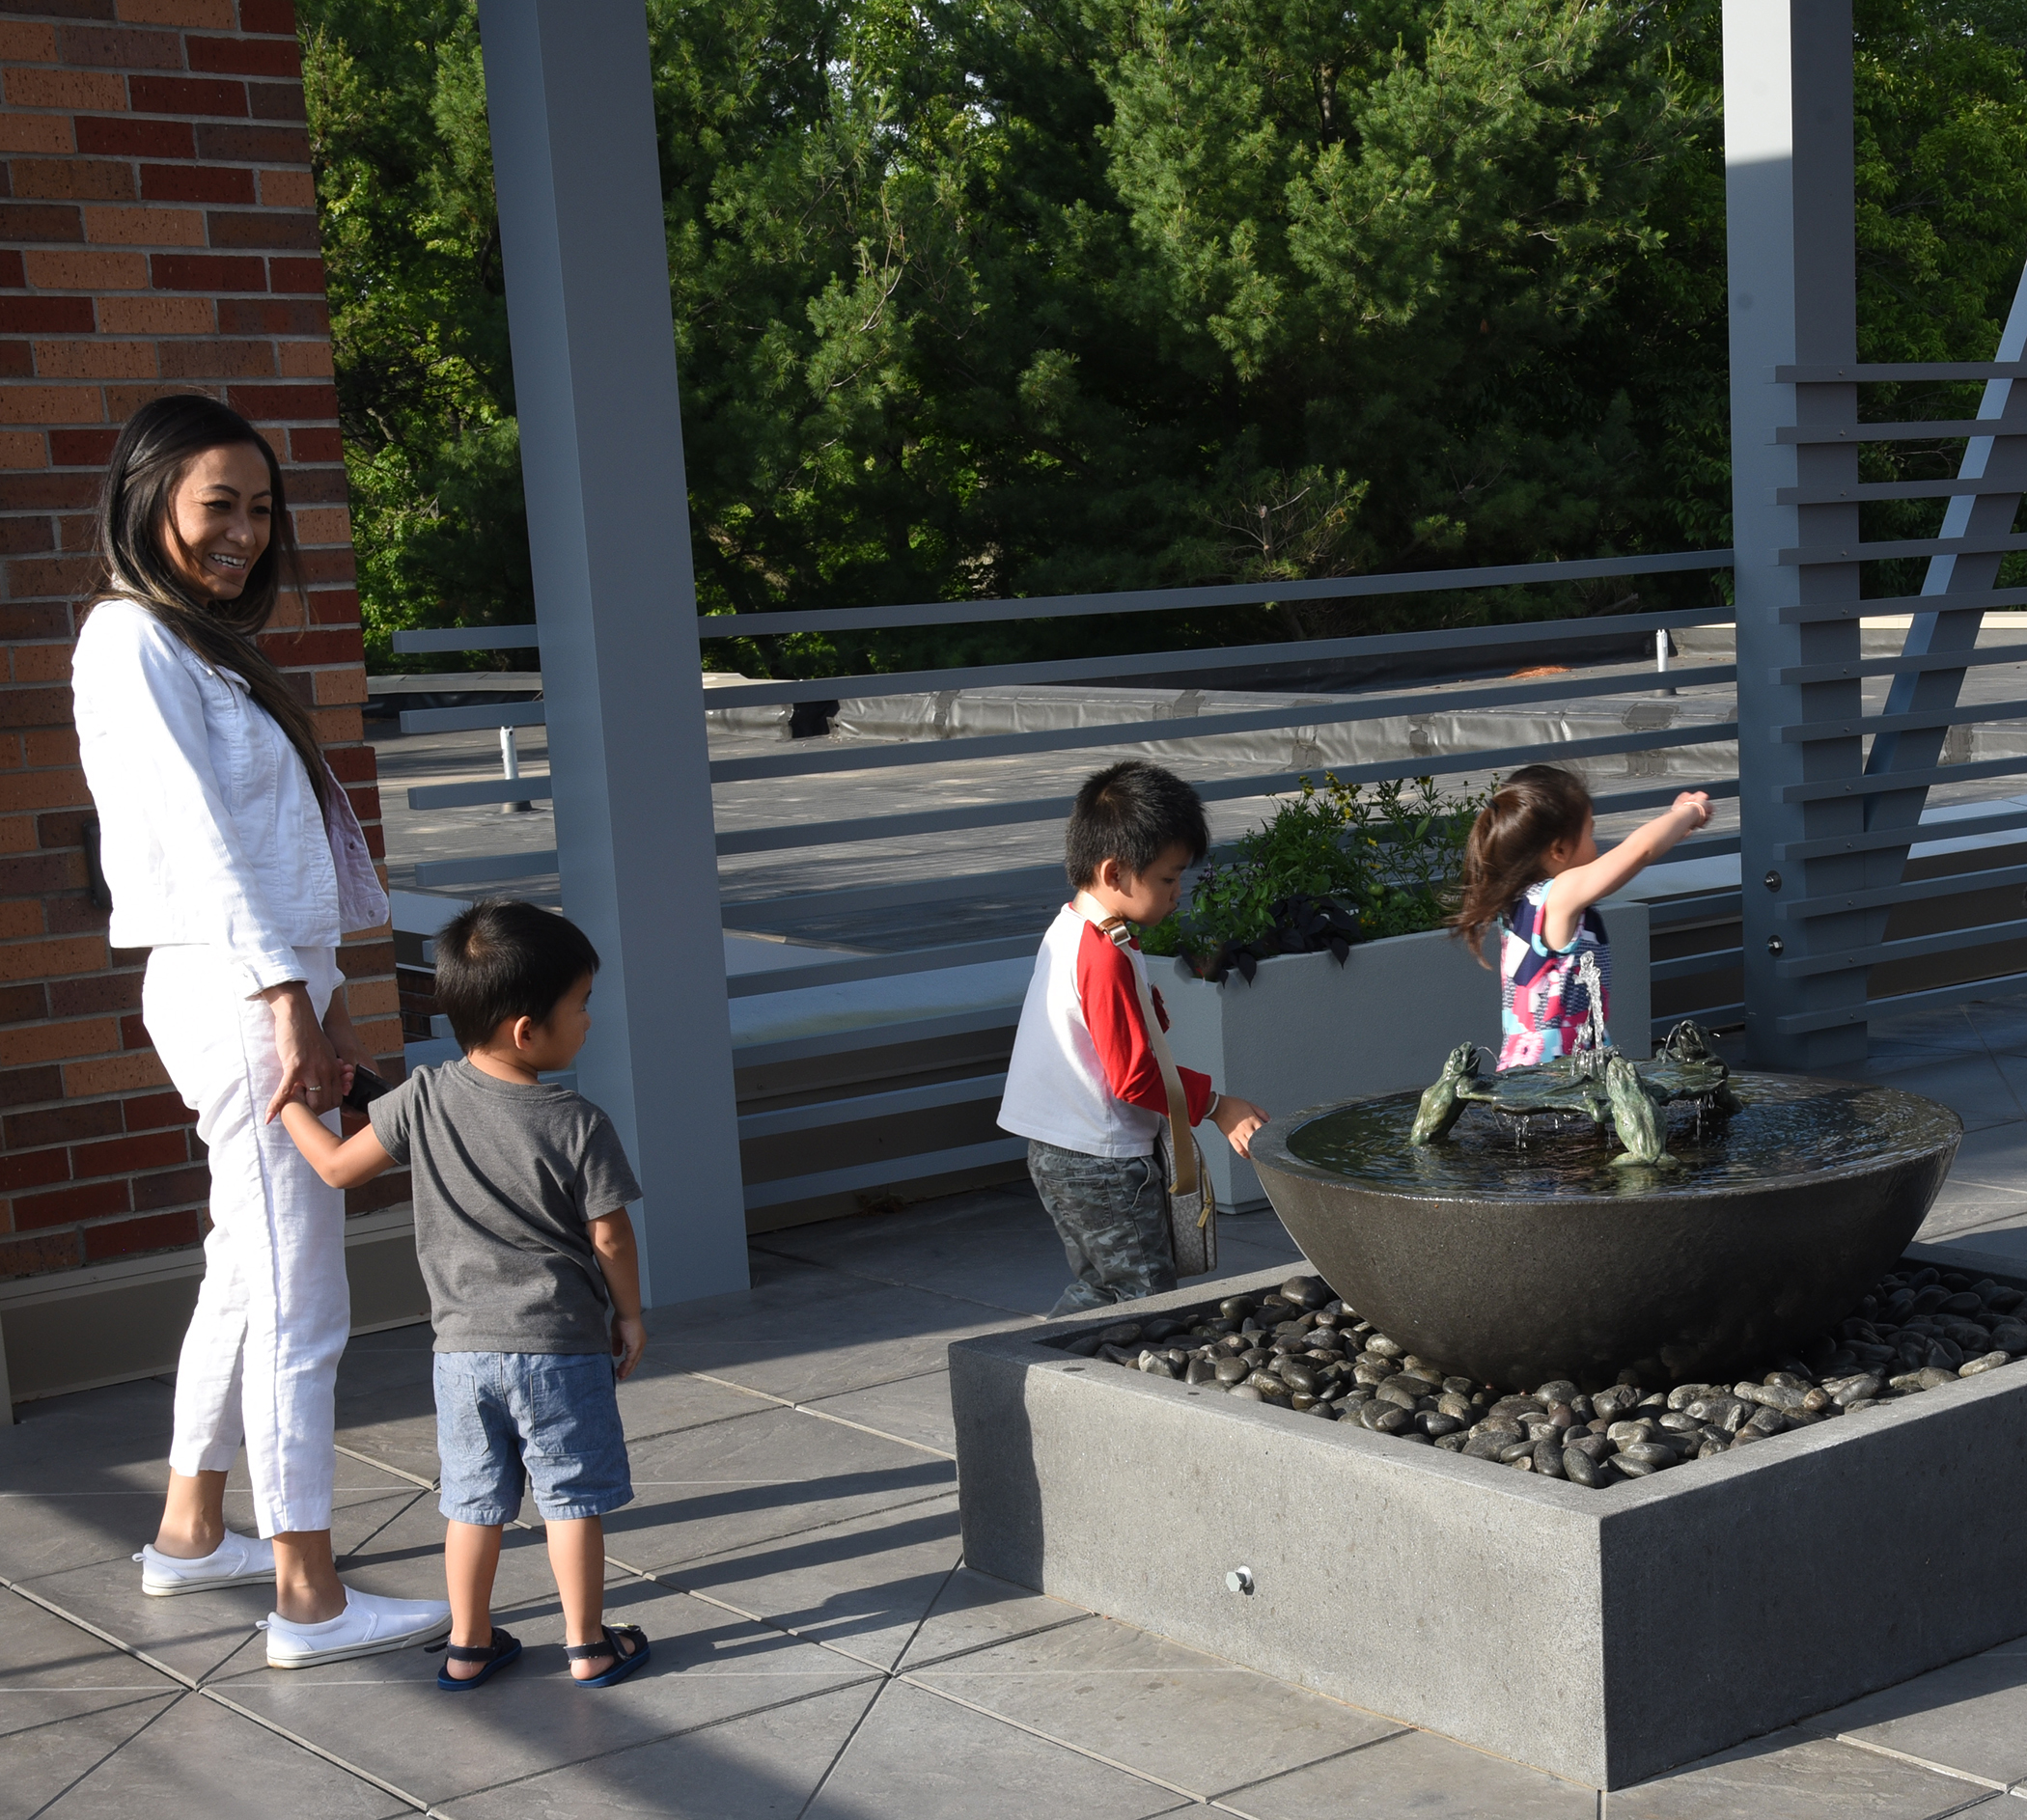 Three young children and a smiling woman gather near a fountain, featuring a large water-filled bowl with a sculpture of four frogs and a lily pad